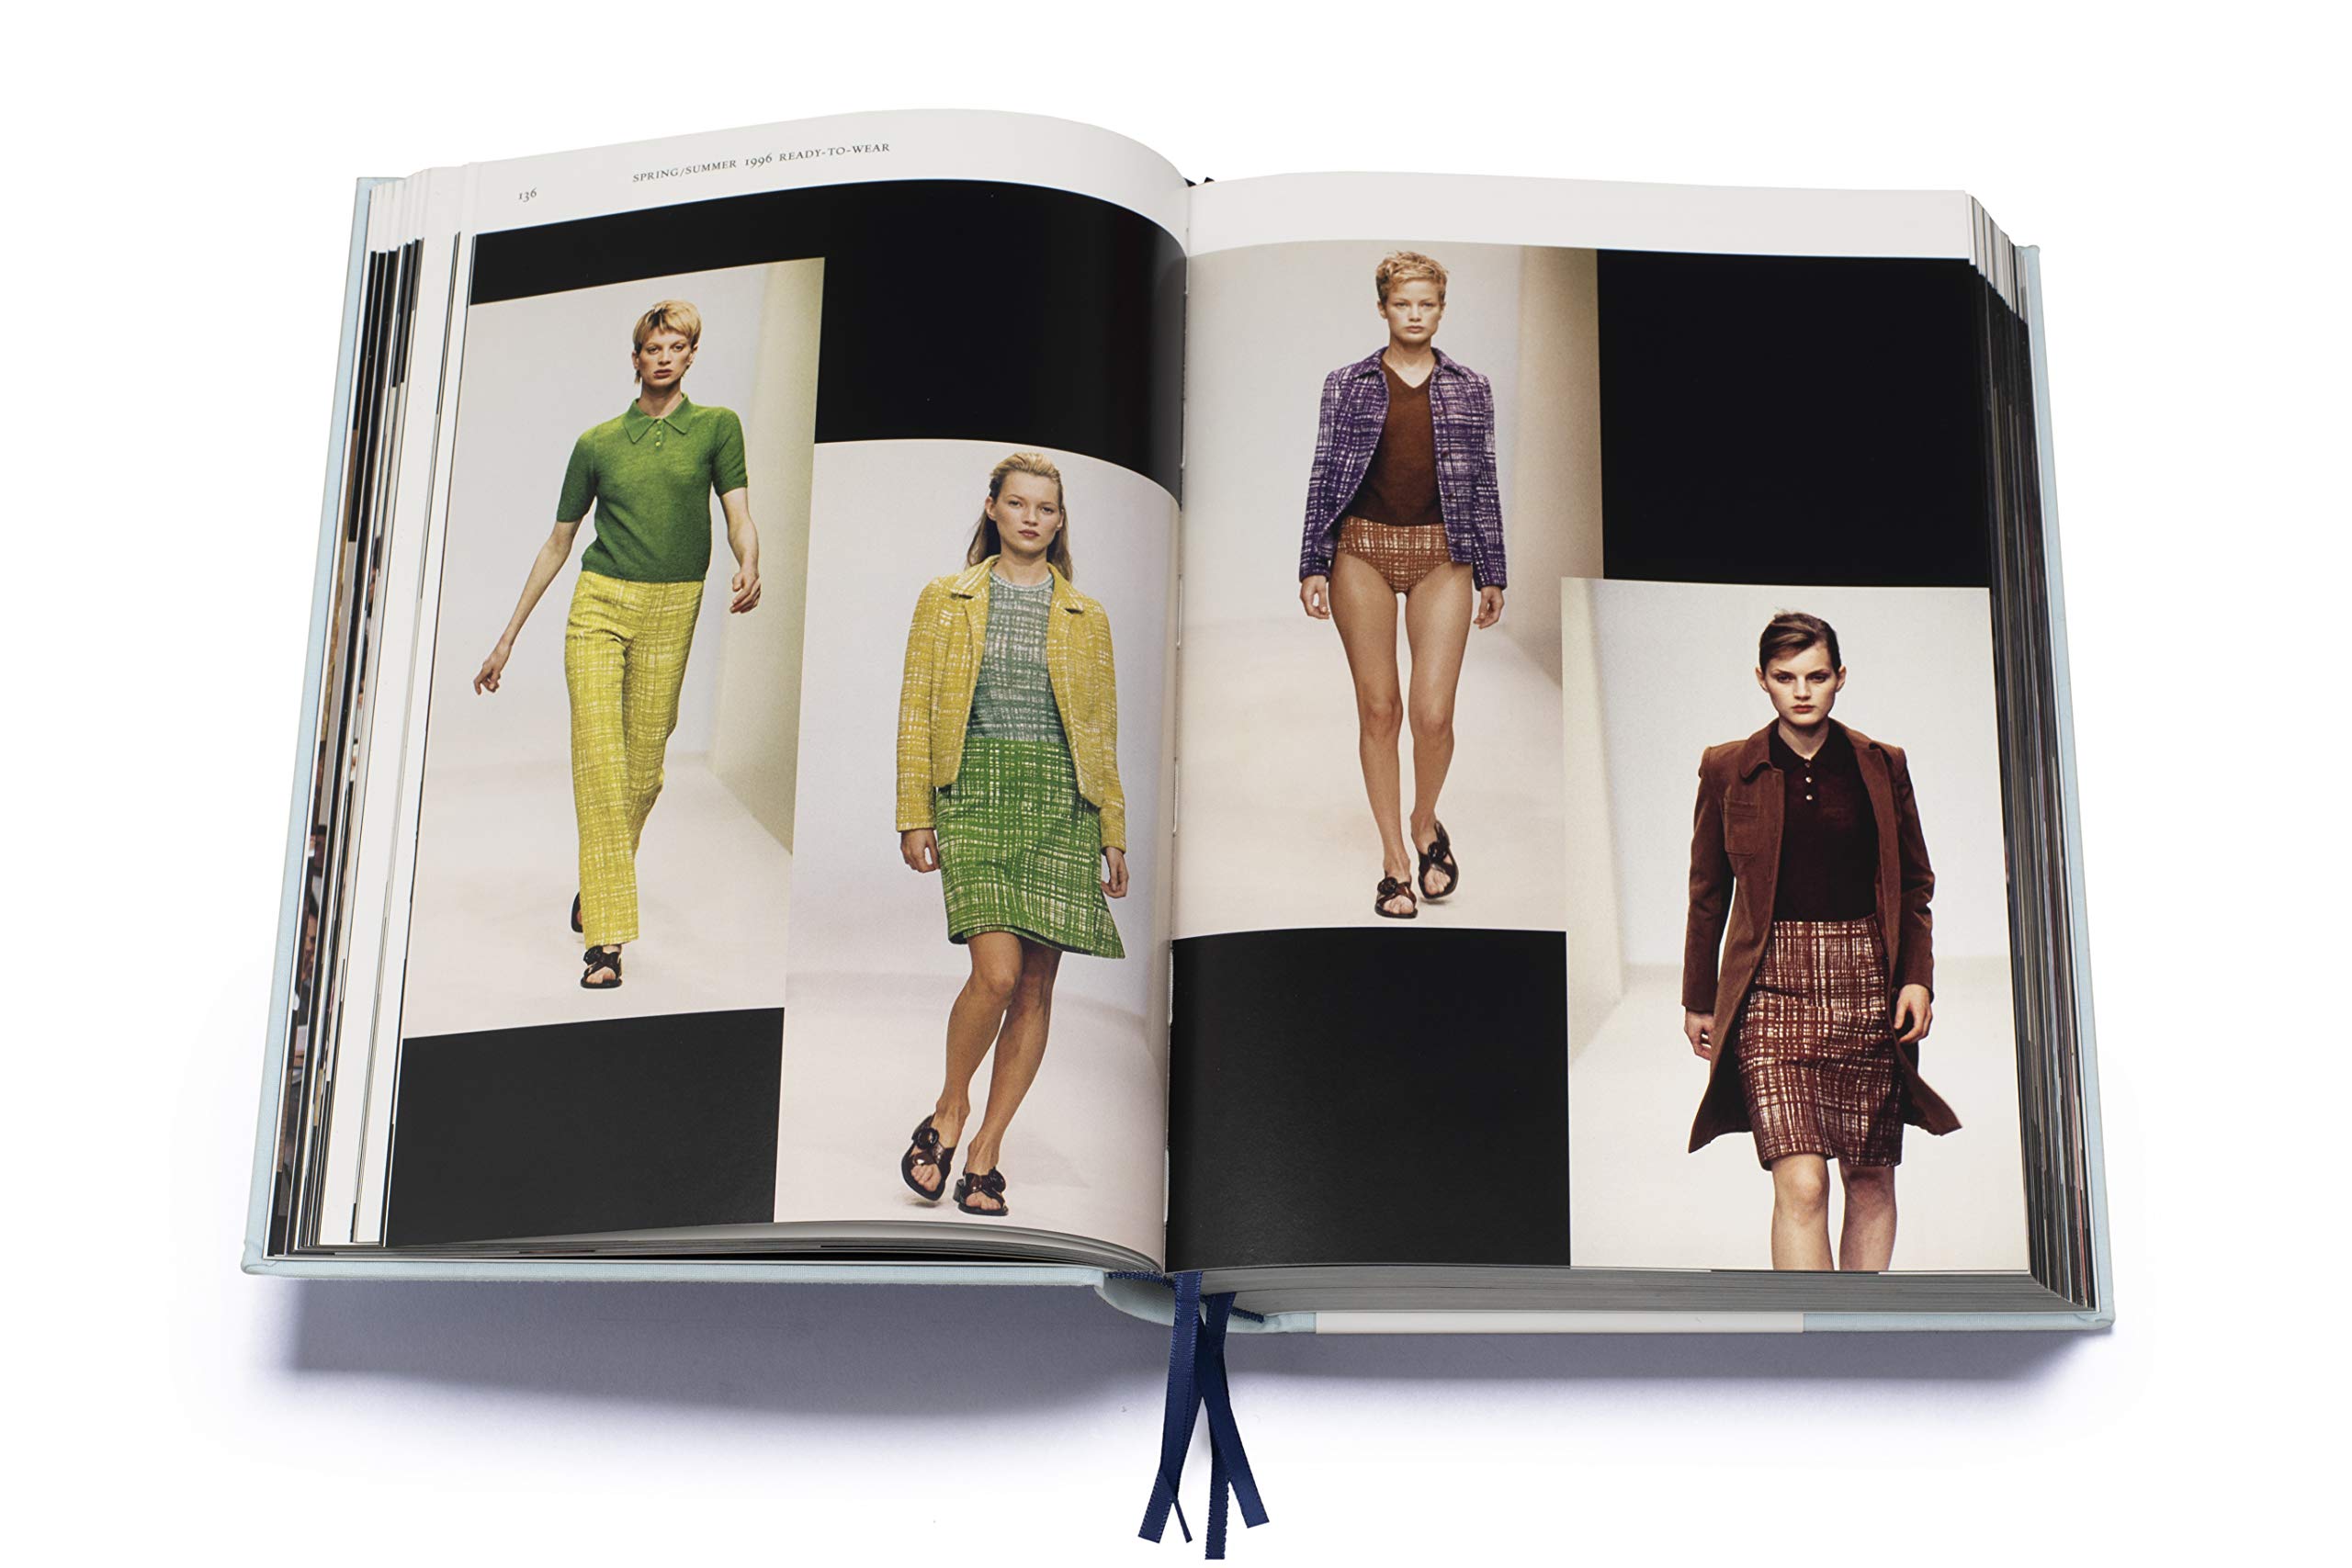 Dukagjini Bookstore - Prada Catwalk: The Complete Collections Founded as a  luxury leather goods house in 1913 in Milan, Prada entered the field of  fashion when Miuccia Prada took the helm of